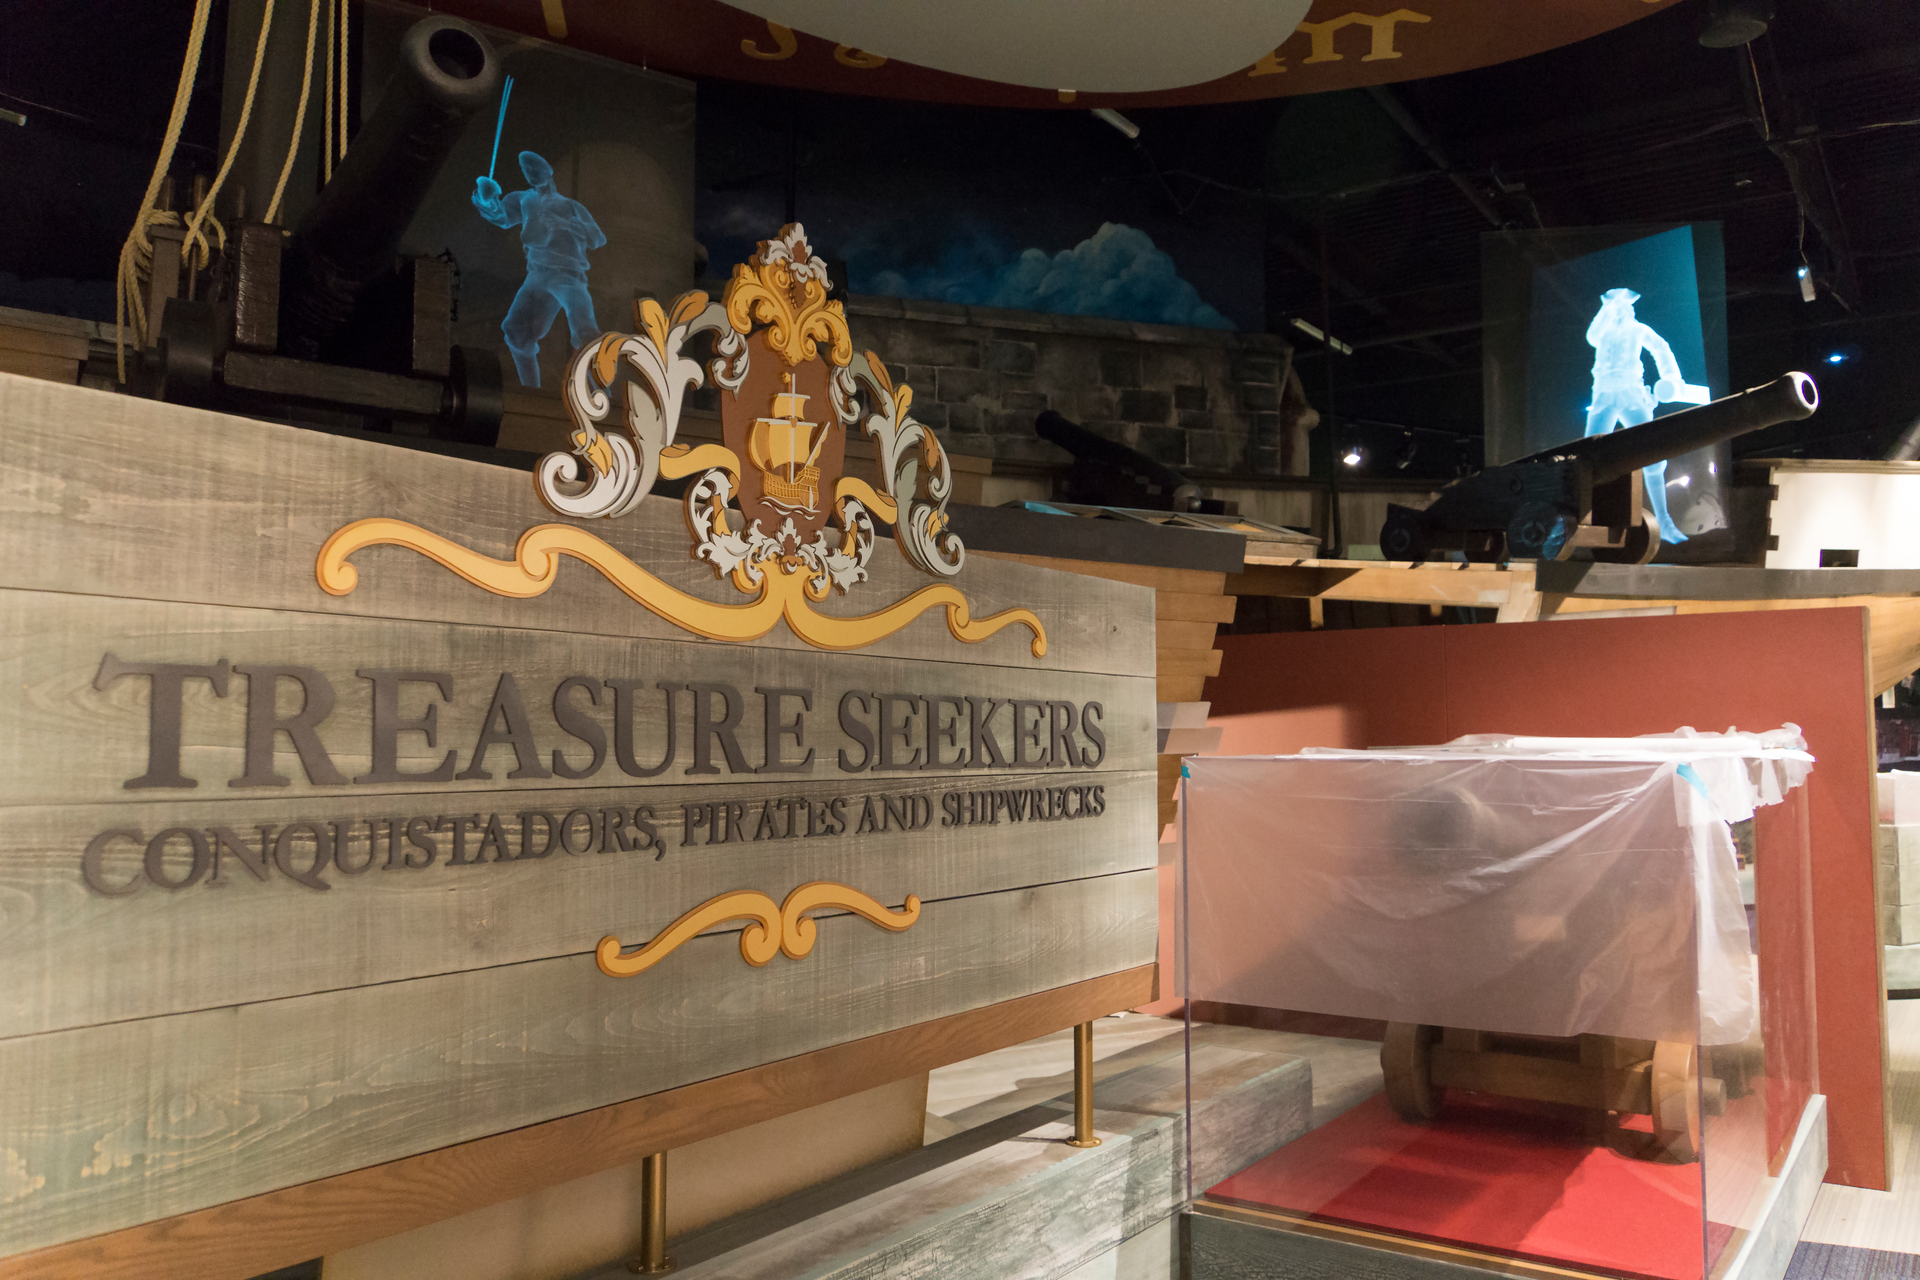 The new Treasure Seekers gallery at the Tampa Bay History Center focuses on conquistadors, pirates, and shipwrecks. - Jennifer Ring